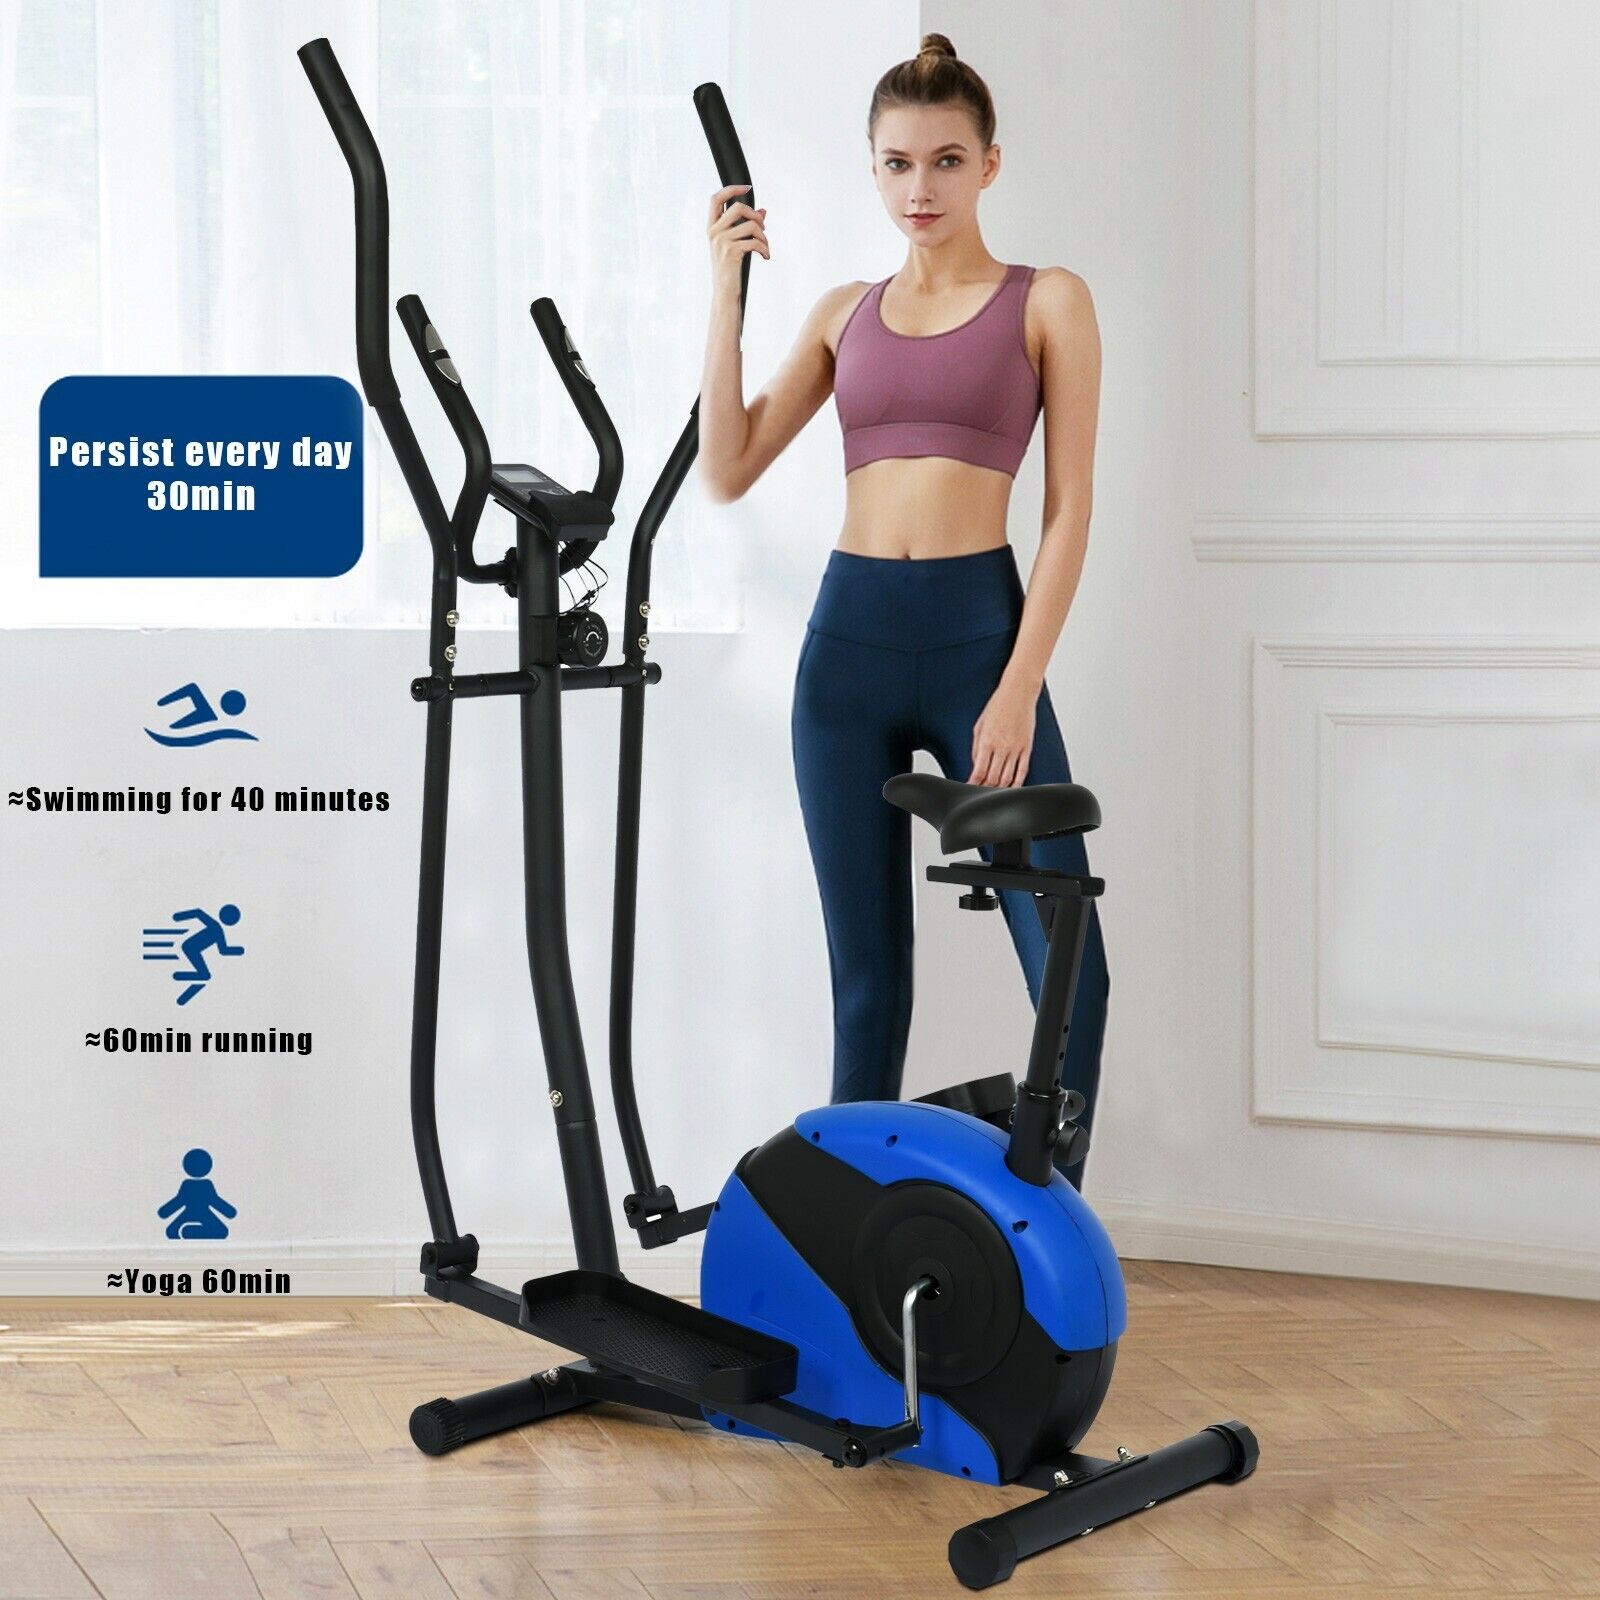 Compact Elliptical Trainer for Effective Home Cardio Workout